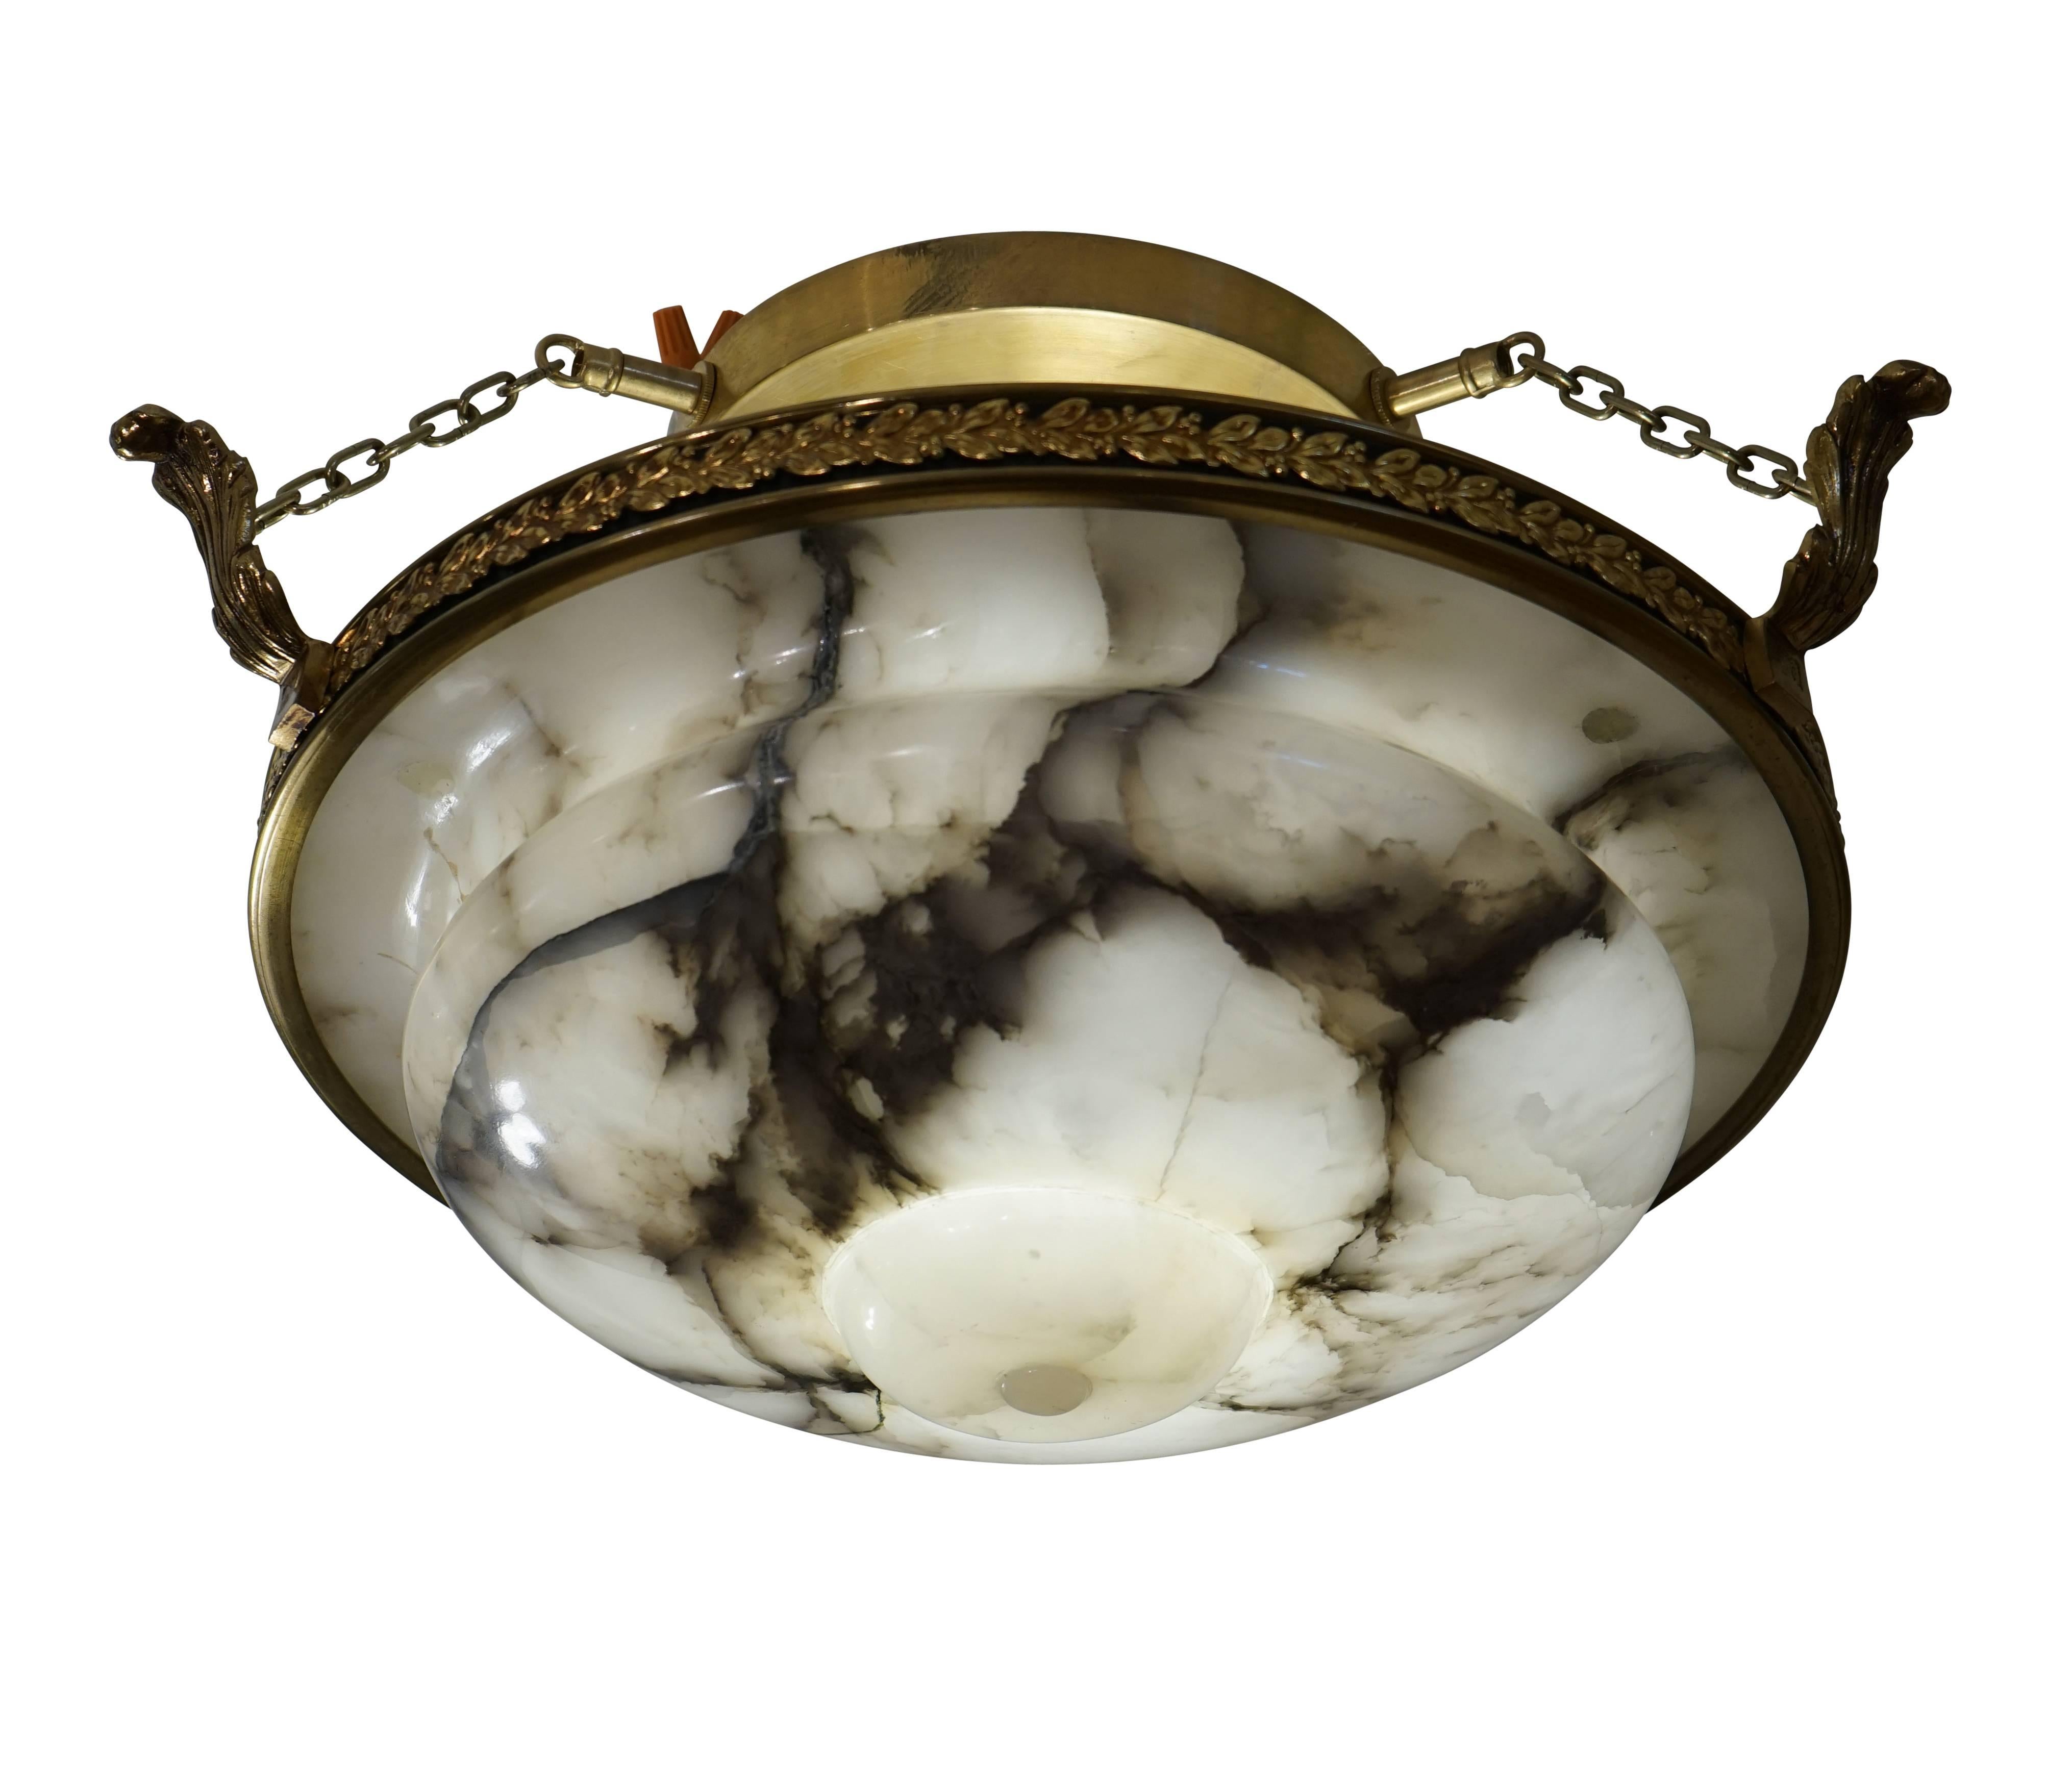 An impressive fixture which nearly hugs the ceiling, the curved and carved charcoal veined alabaster rests inside a leaf strewn brass ring. Recently rewired, the light holds one 100watt LED equivalent bulb.